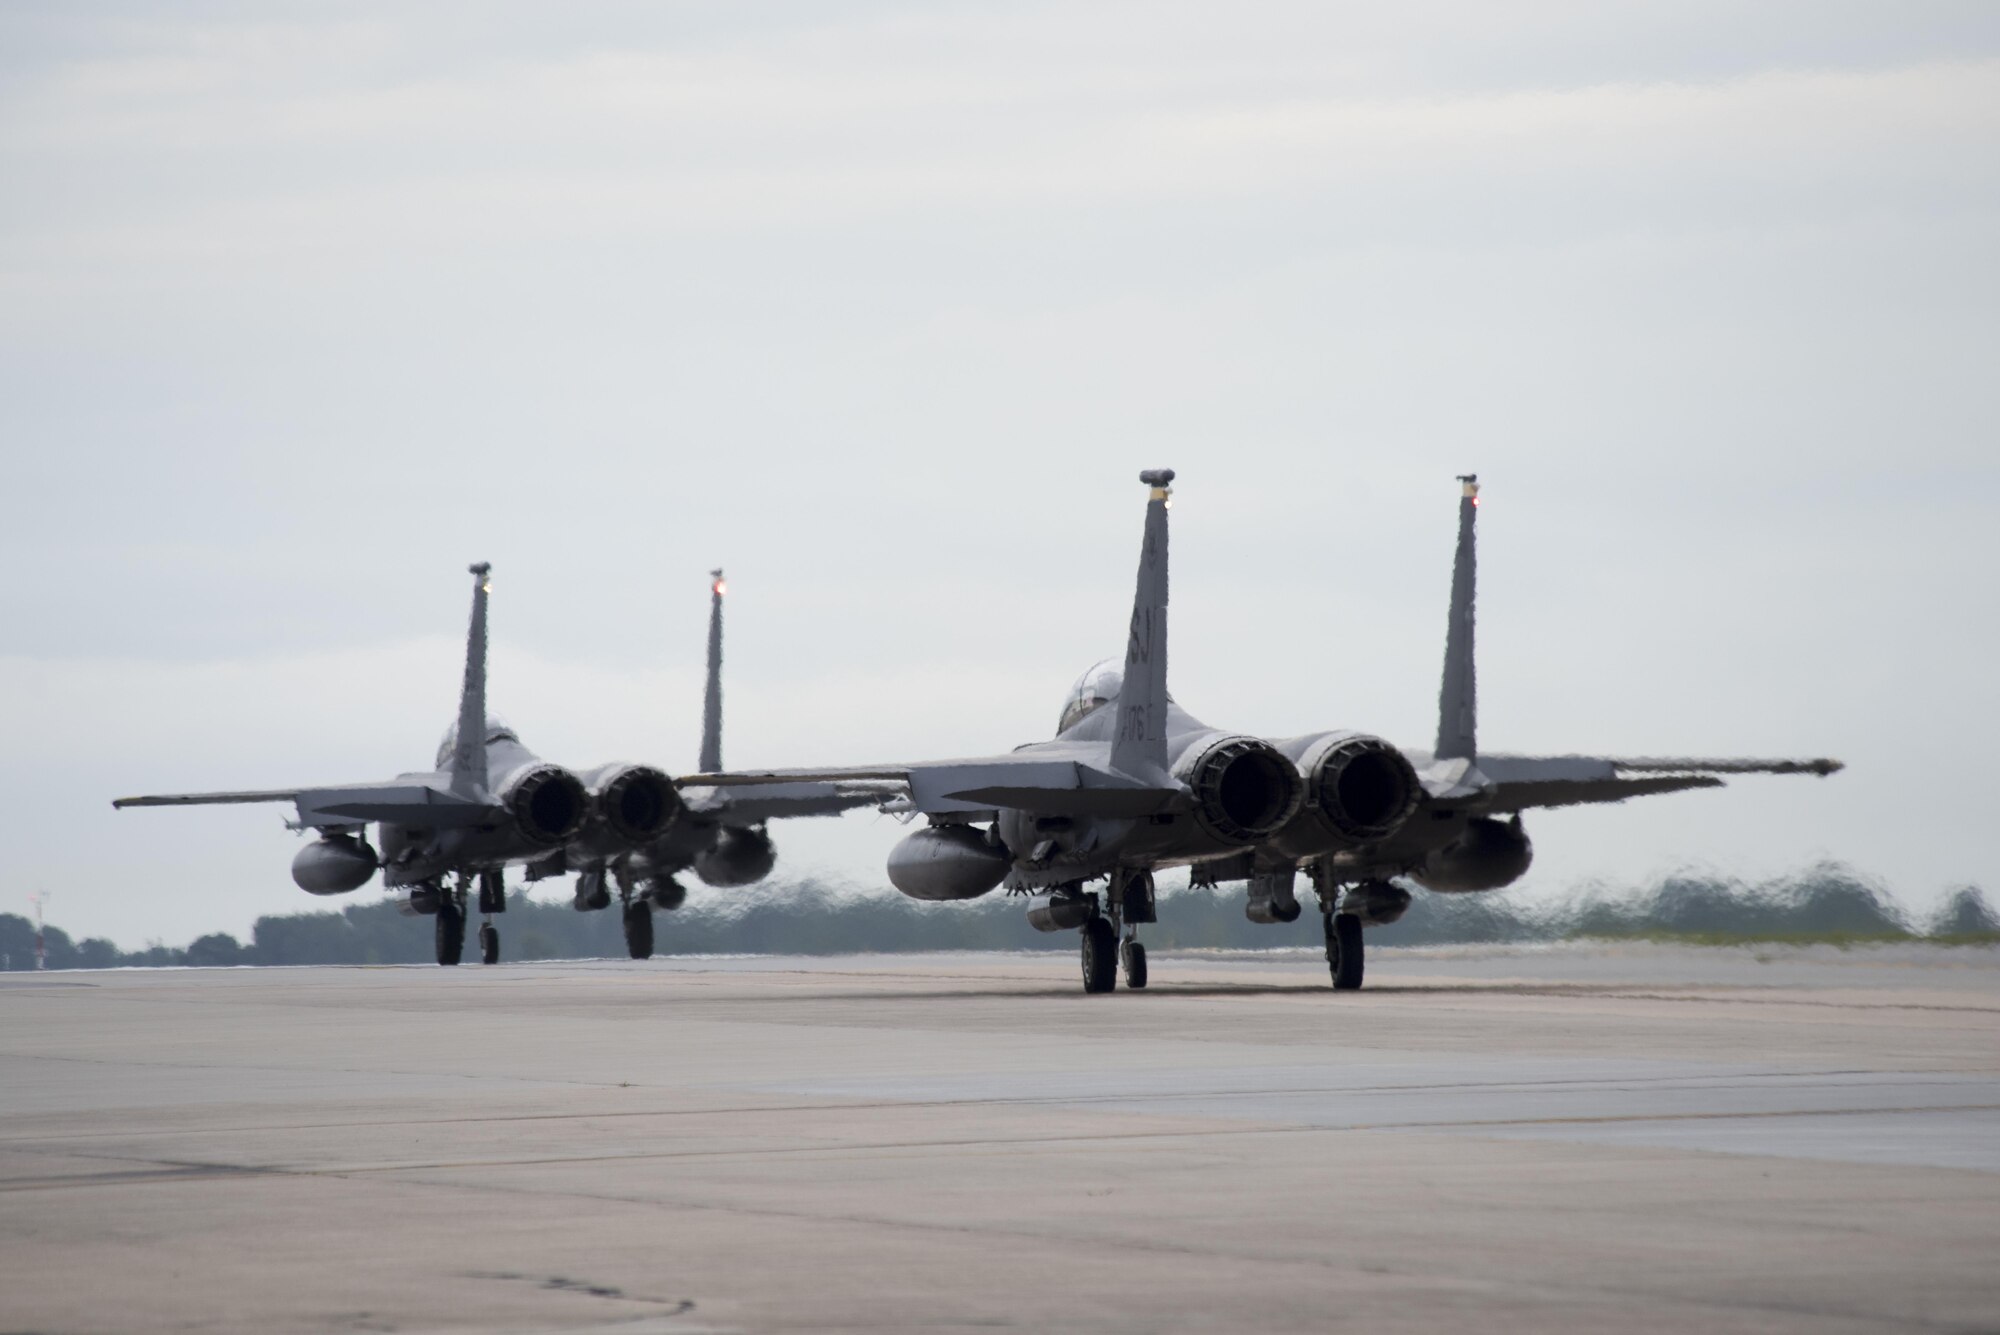 Two F-15E Strike Eagles taxi down the runway, Aug. 4, 2017, at Seymour Johnson Air Force Base, North Carolina. Approximately 12 jets from the 336th Fighter Squadron left to participate in exercise Combat Hammer at Hill Air Force Base, Utah. (U.S. Air Force photo by Airman 1st Class Shawna L. Keyes)